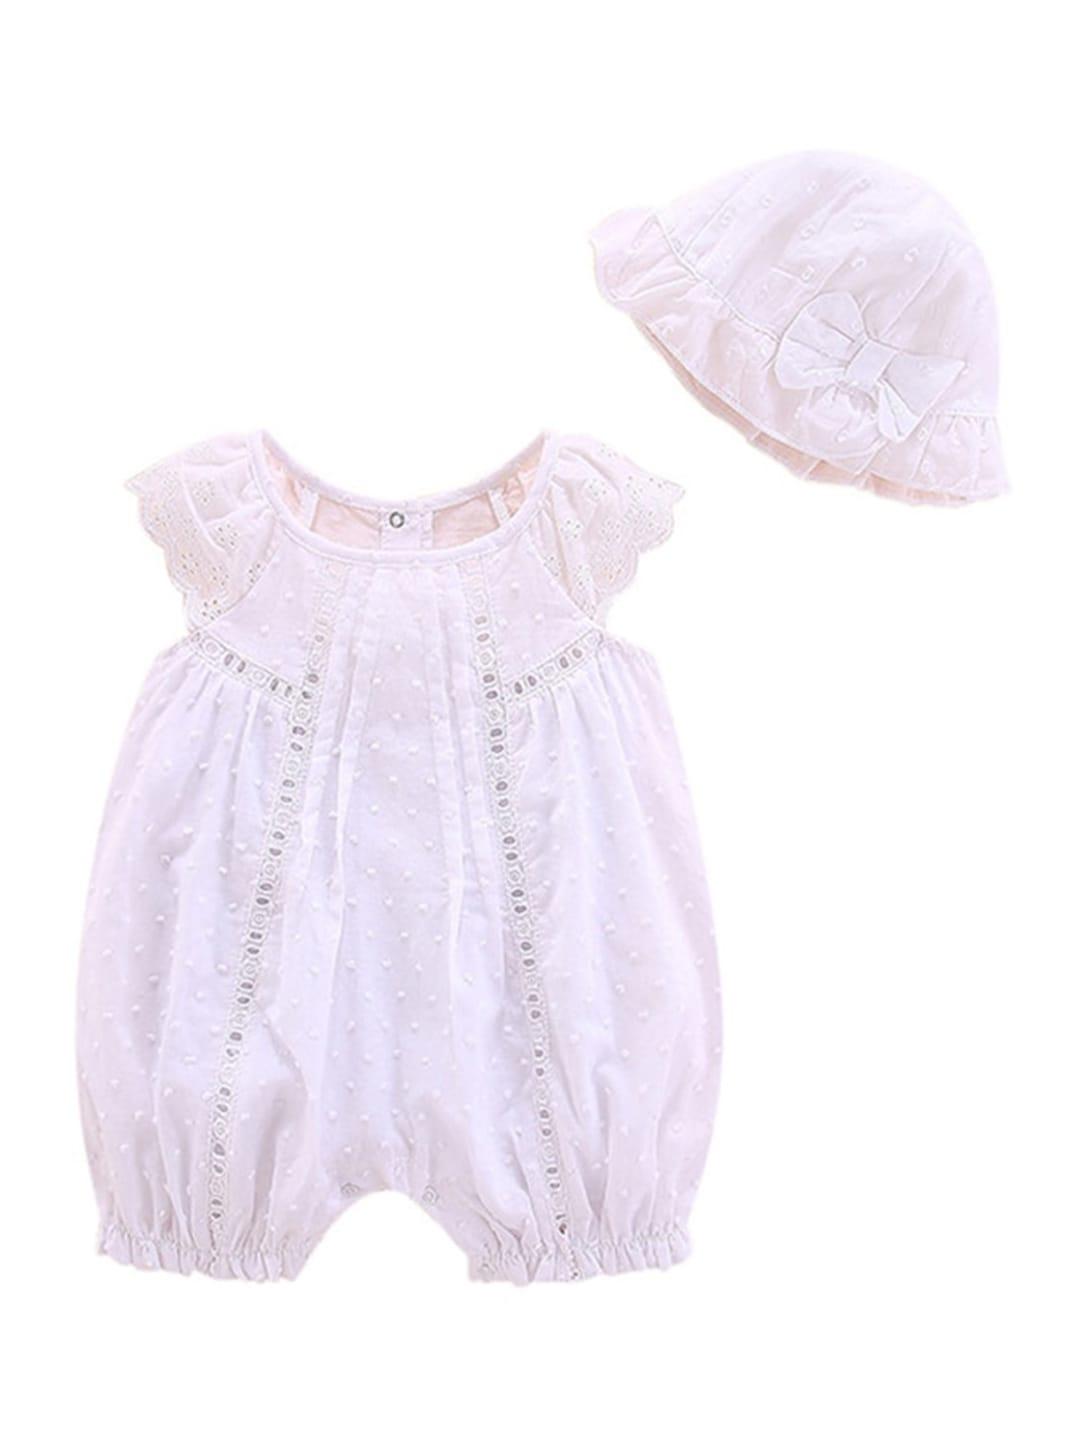 stylecast-infants-pure-cotton-rompers